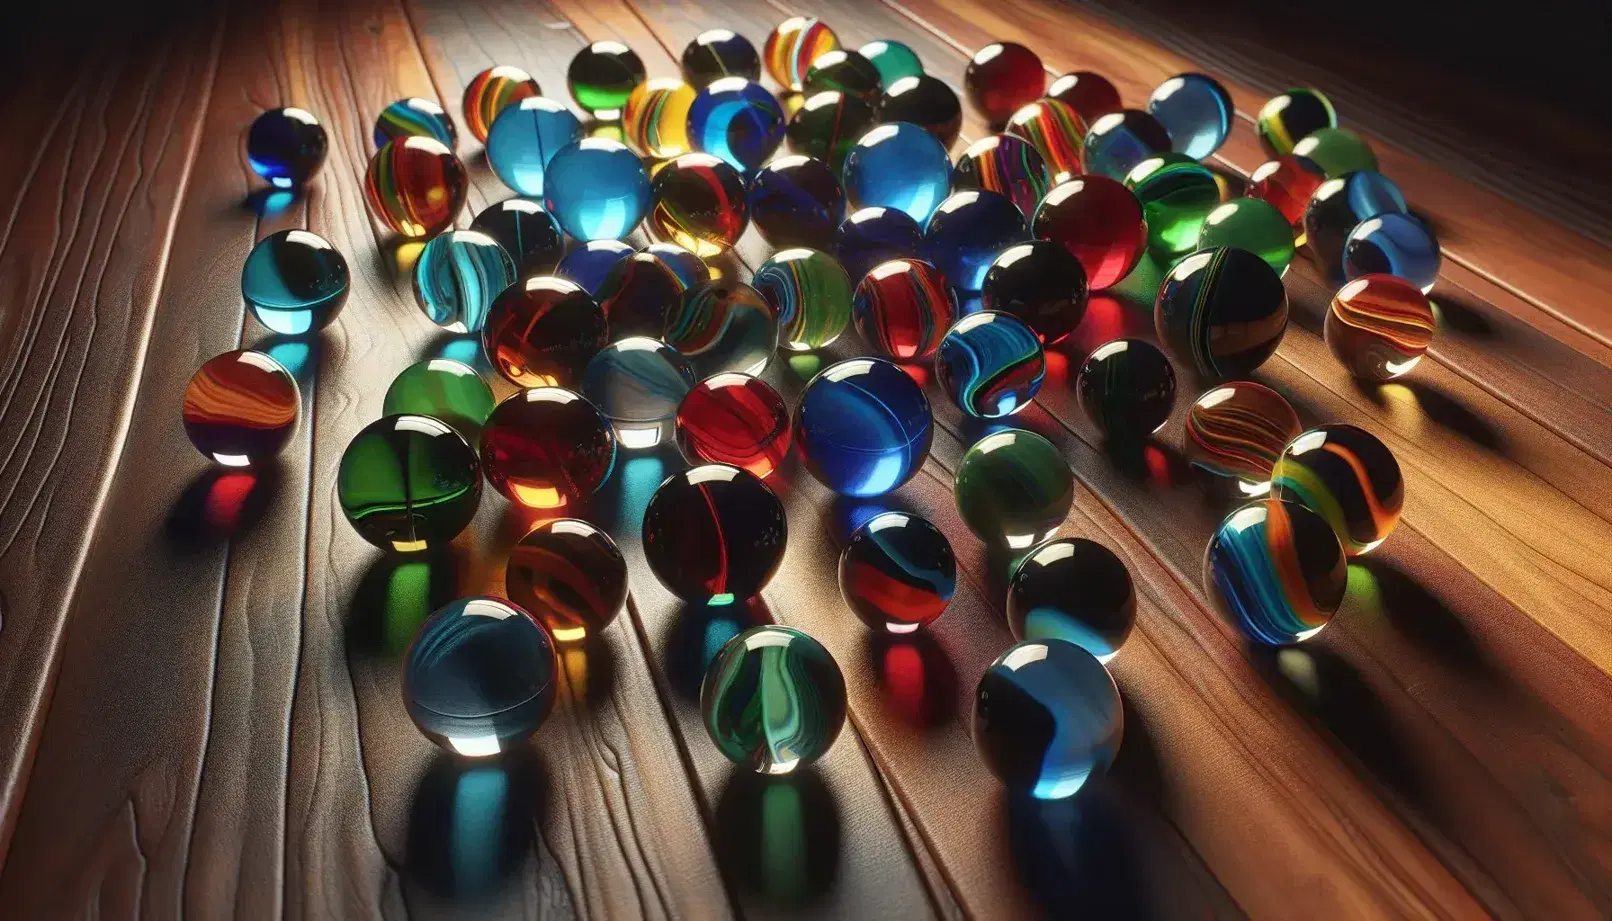 Colored glass marbles scattered on dark wooden surface, with transparent shades and bright reflections, variable shadows.